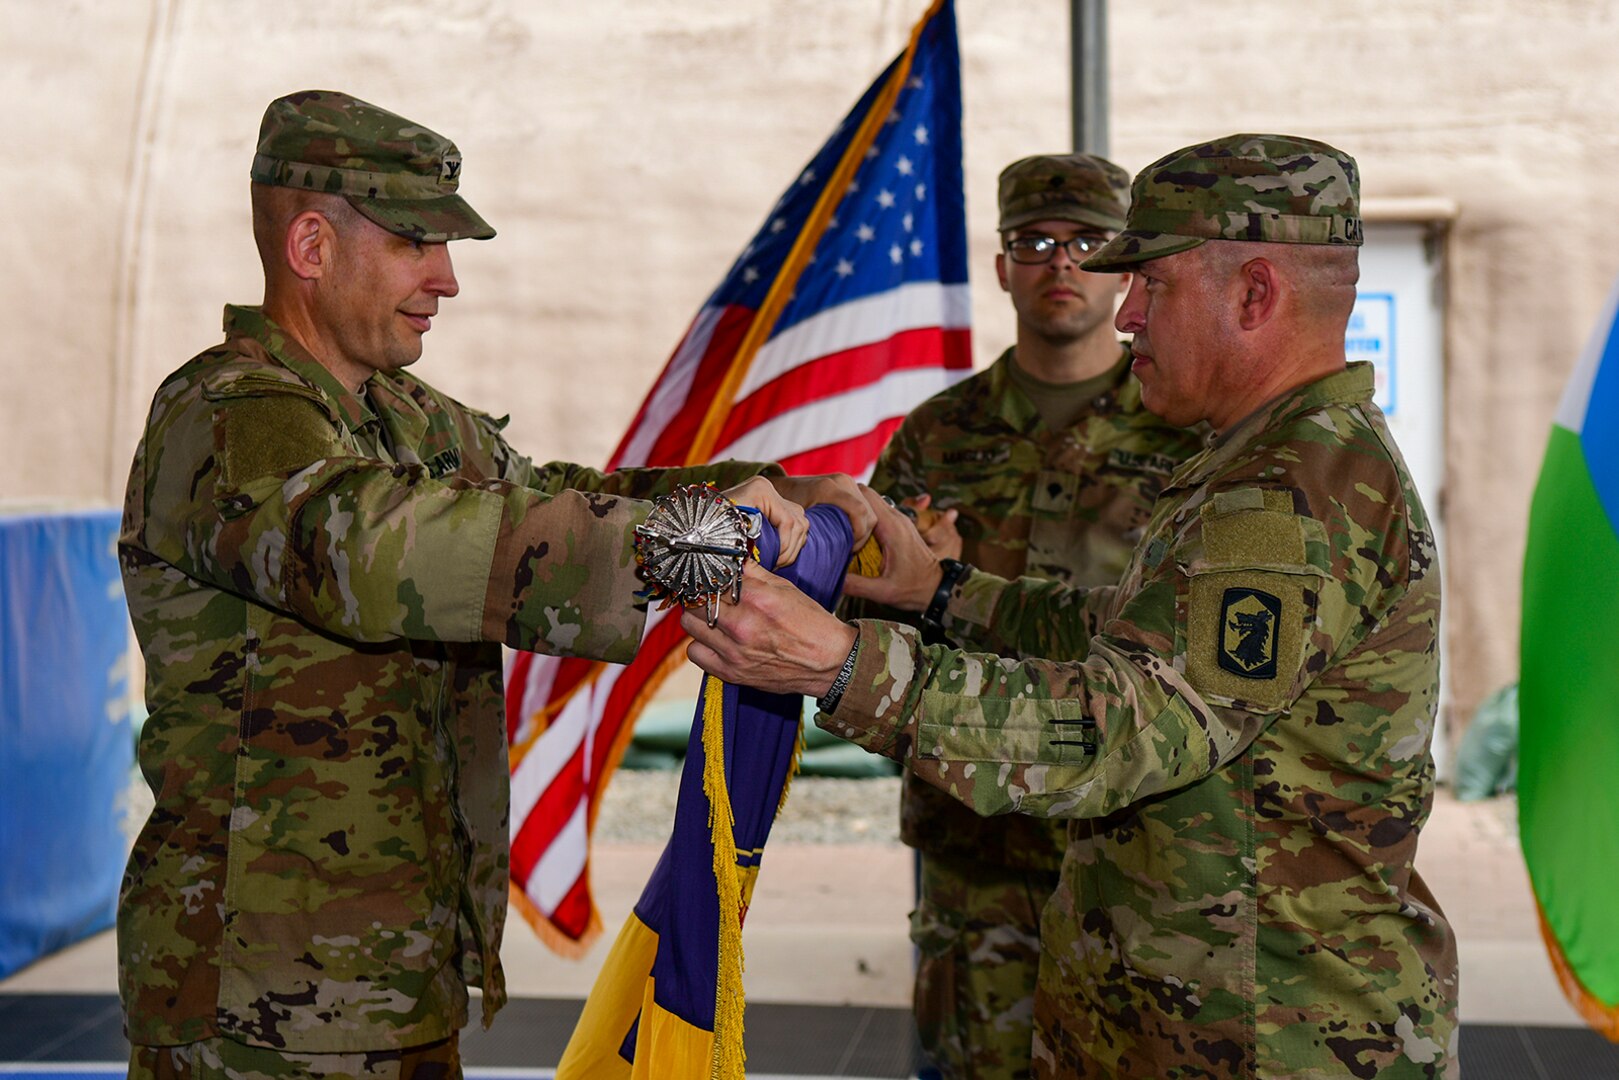 U.S. Army Col. Justin Towell, left, incoming chief of staff of Combined Joint Task Force – Horn of Africa (CJTF-HOA), and U.S. Army Command Sgt. Maj. Richard Carroll, senior enlisted leader of the 404th Maneuver Enhancement Brigade (MEB), assume authority of the CJTF-HOA mission during a transfer of authority ceremony at Camp Lemonnier, Djibouti, Feb. 26, 2022.